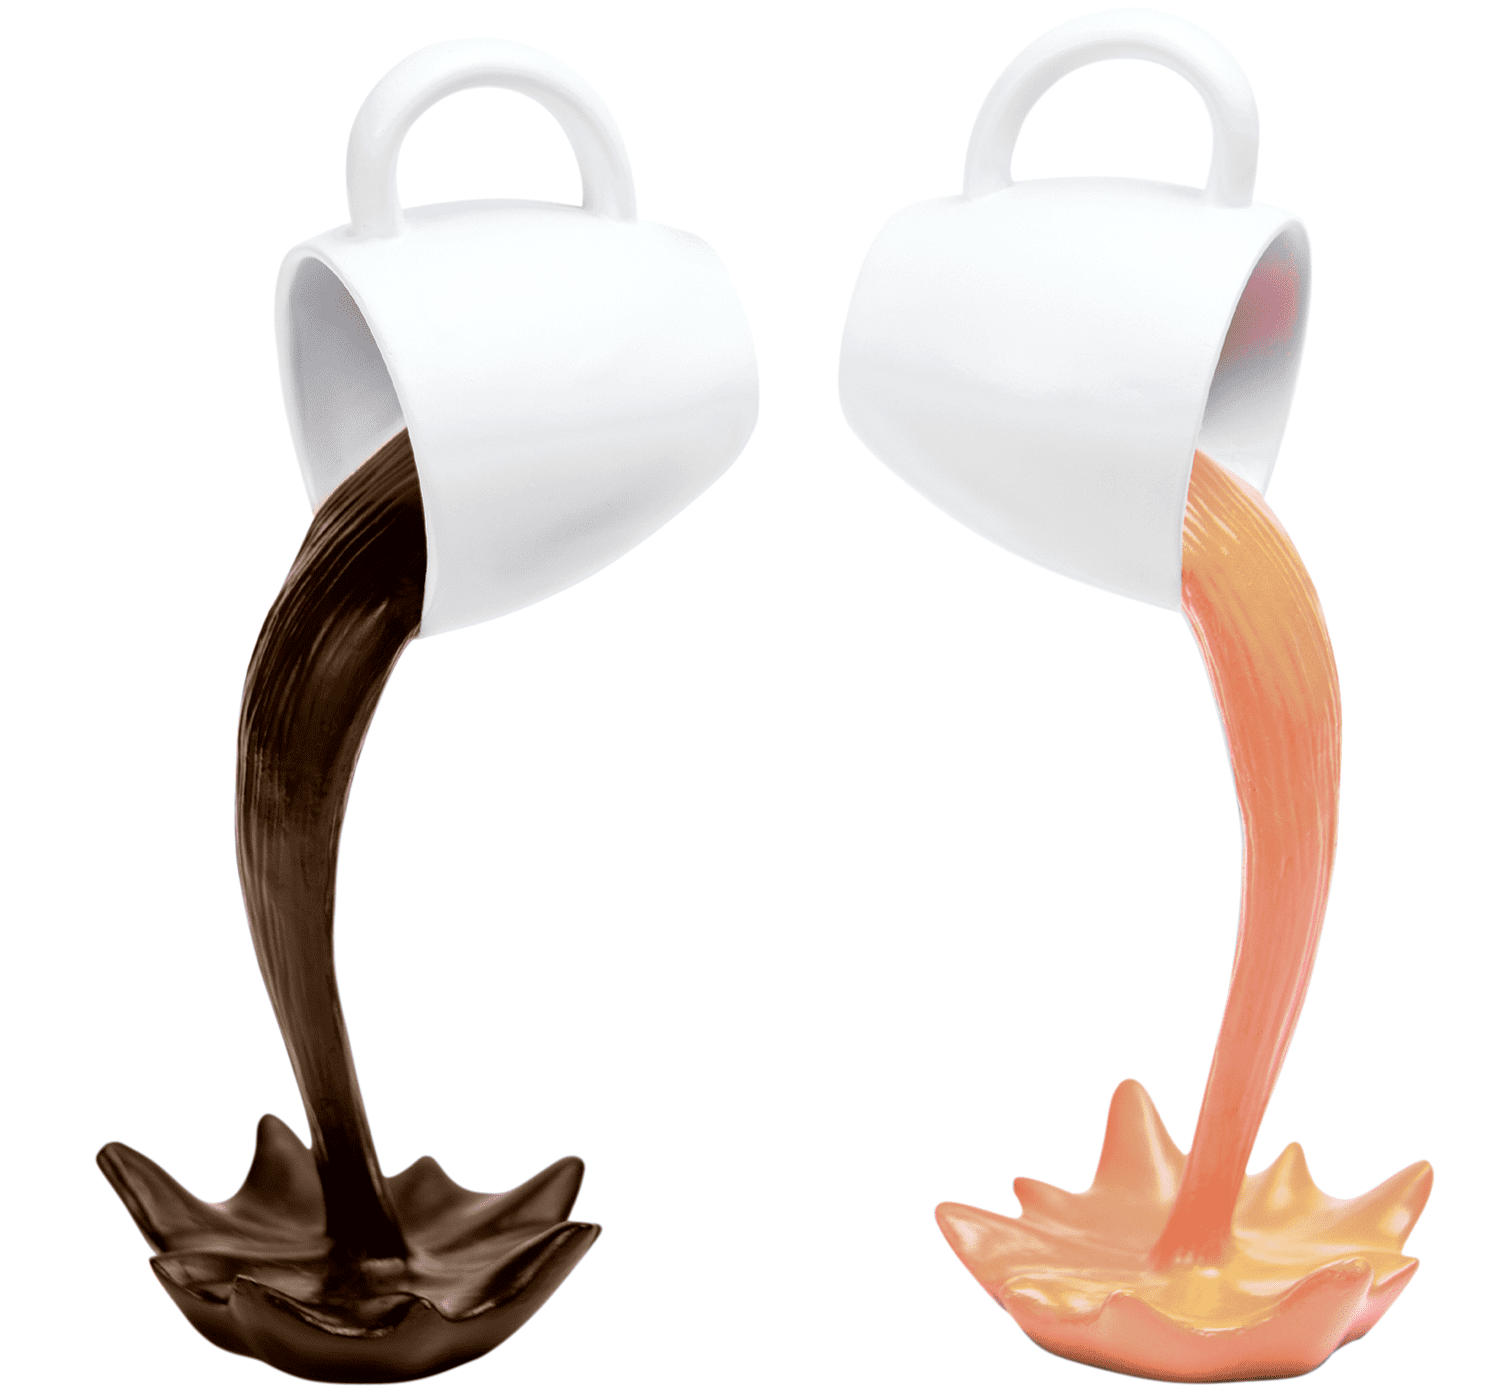 Floating Coffee Cup Coffee Bar Decor Set of 2 Hand-Painted, 8.7 in. Tall Mugs Spilling 2 Colors of Coffee